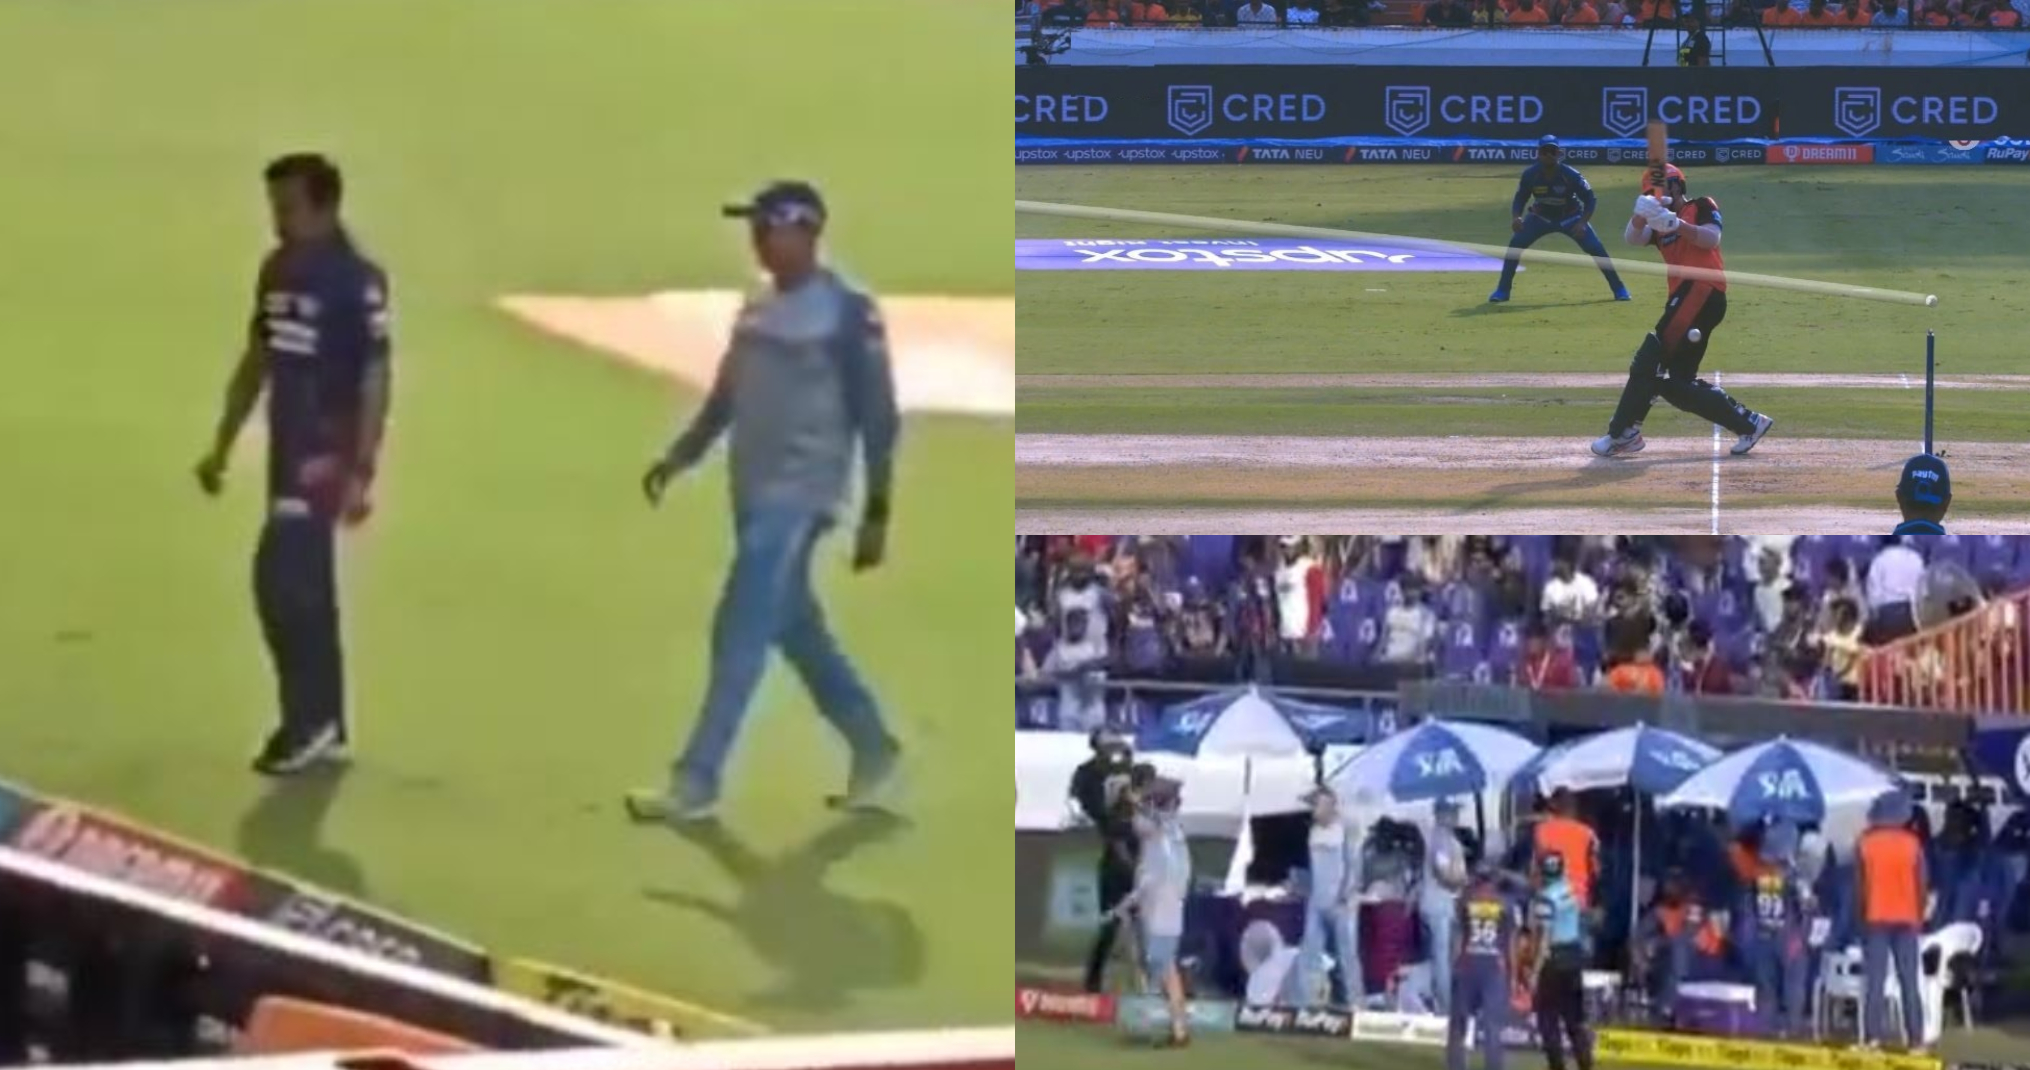 A controversial no-ball triggered quite a furor in Hyderabad crowd | Twitter